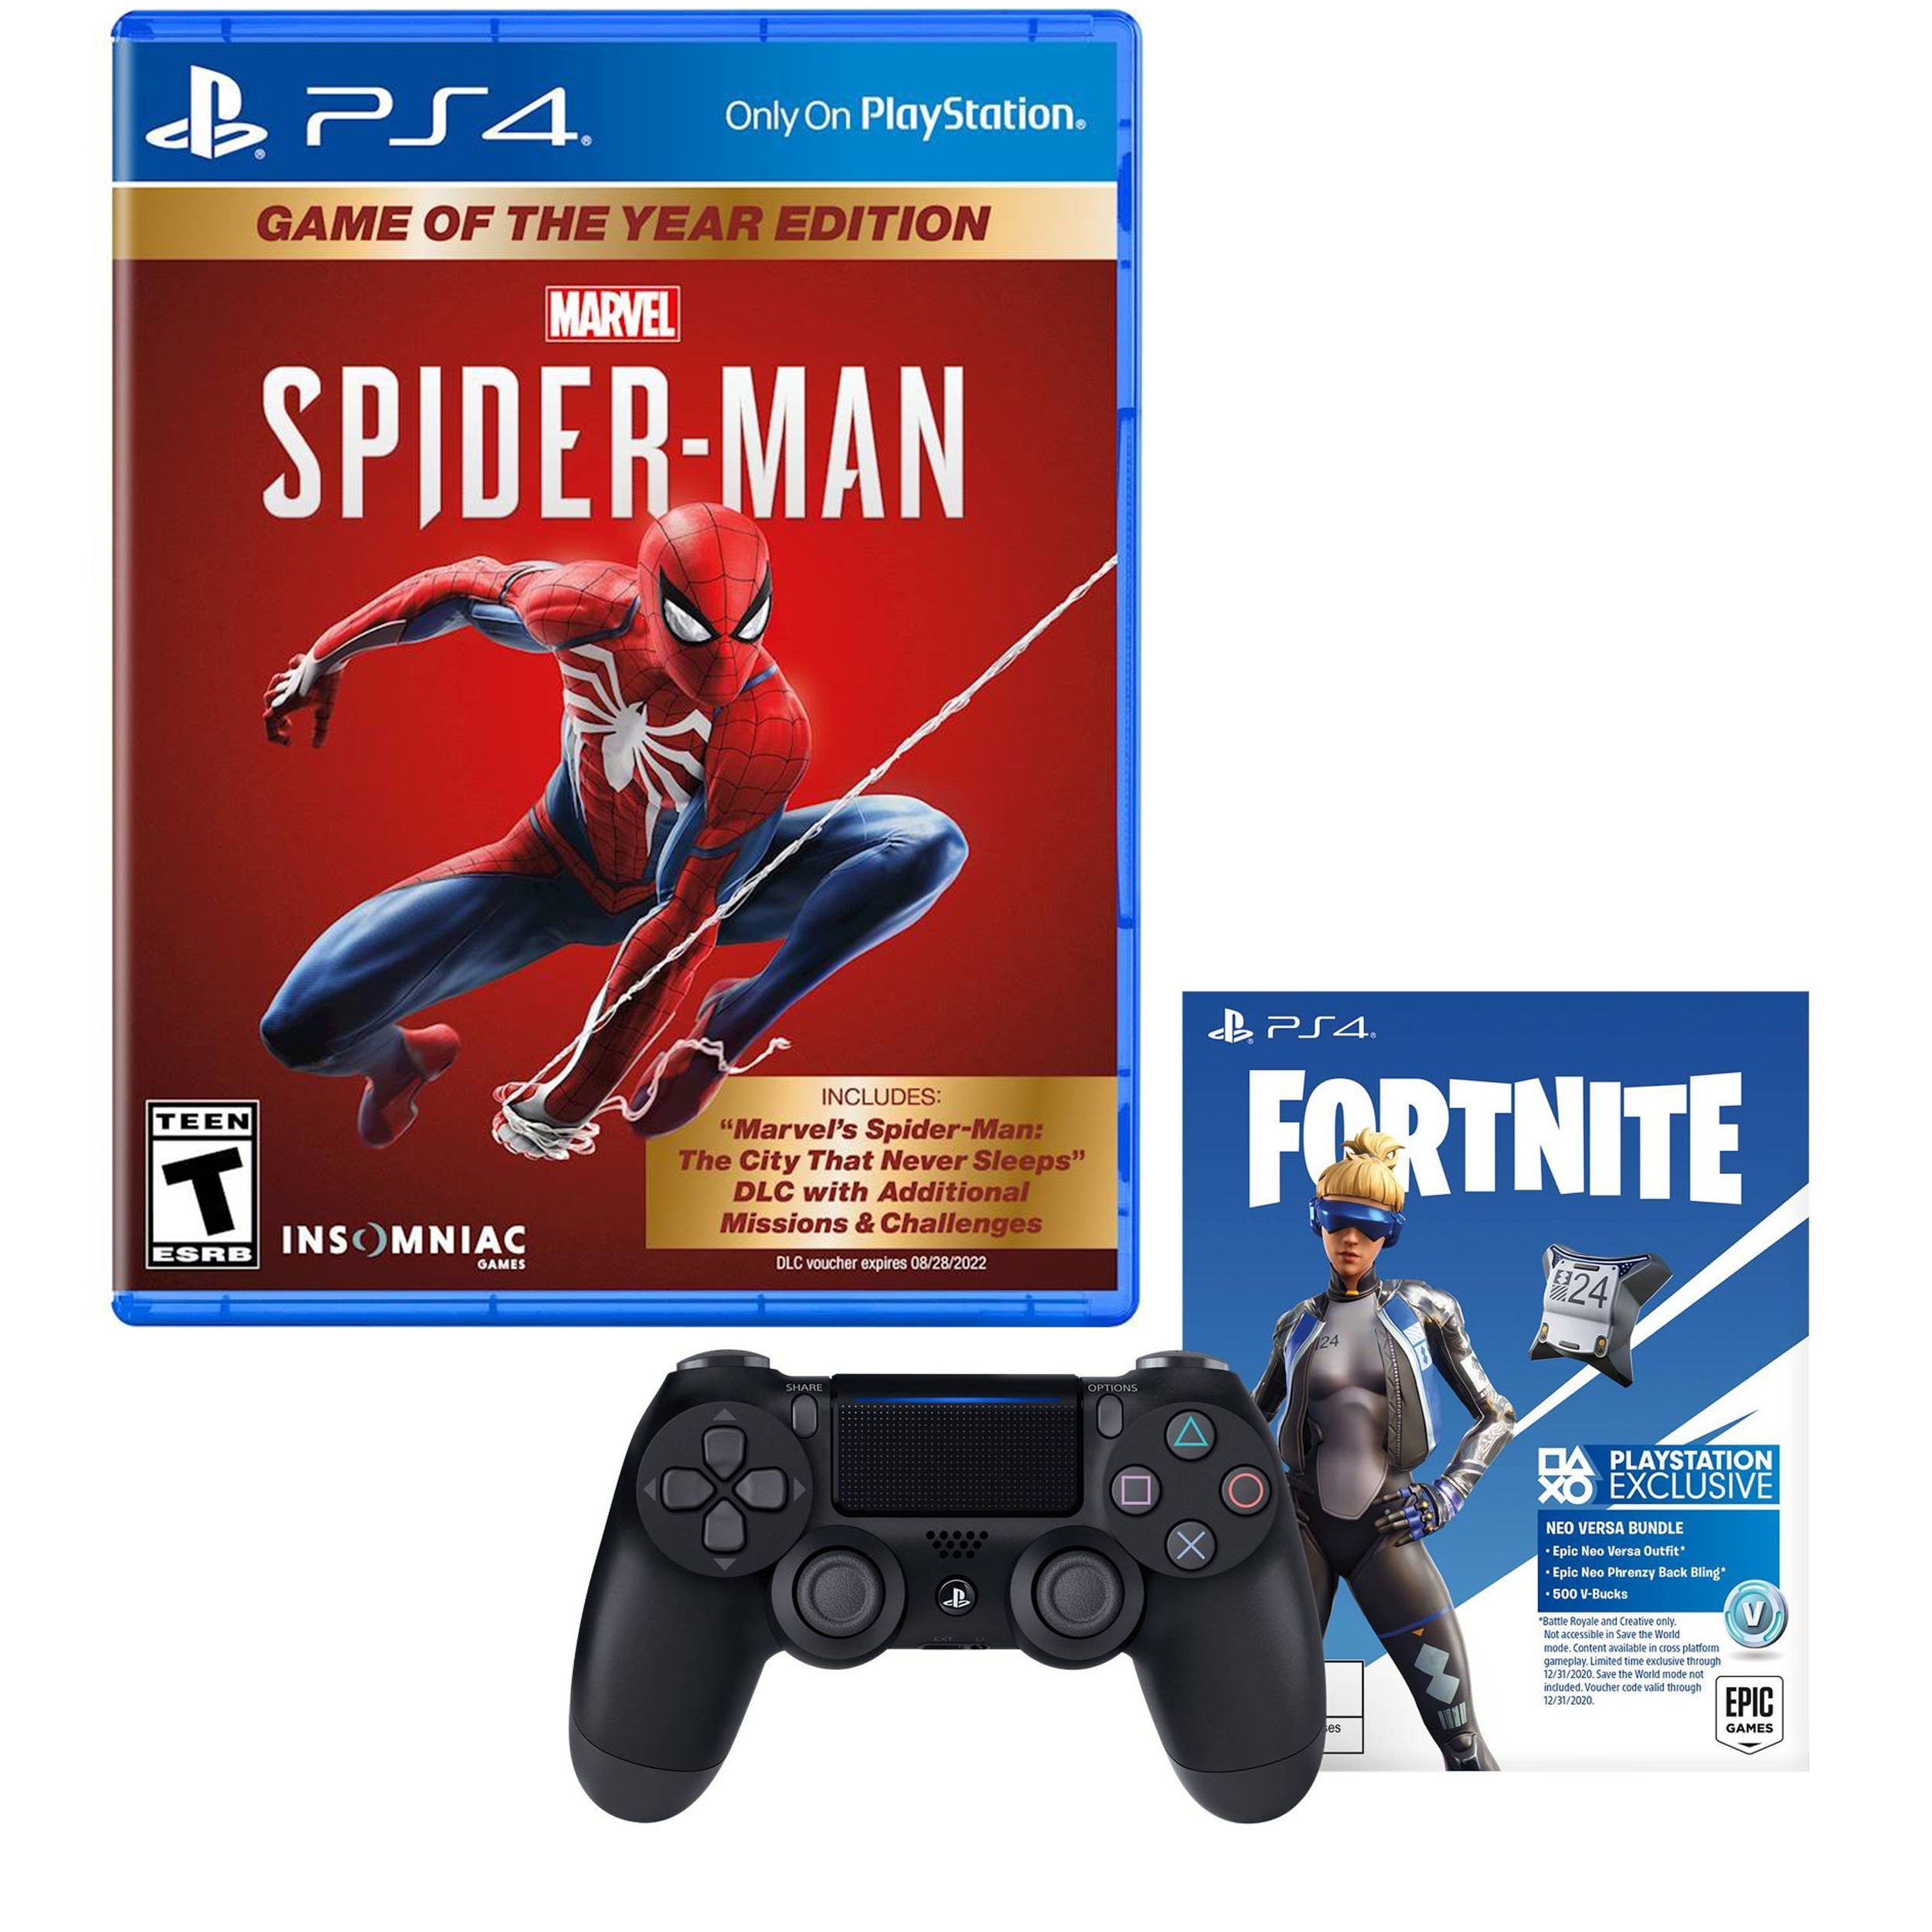 PlayStation 4 DualShock Controller with Fortnite and Spiderman: Game of the  Year Edition for the PlayStation 4 